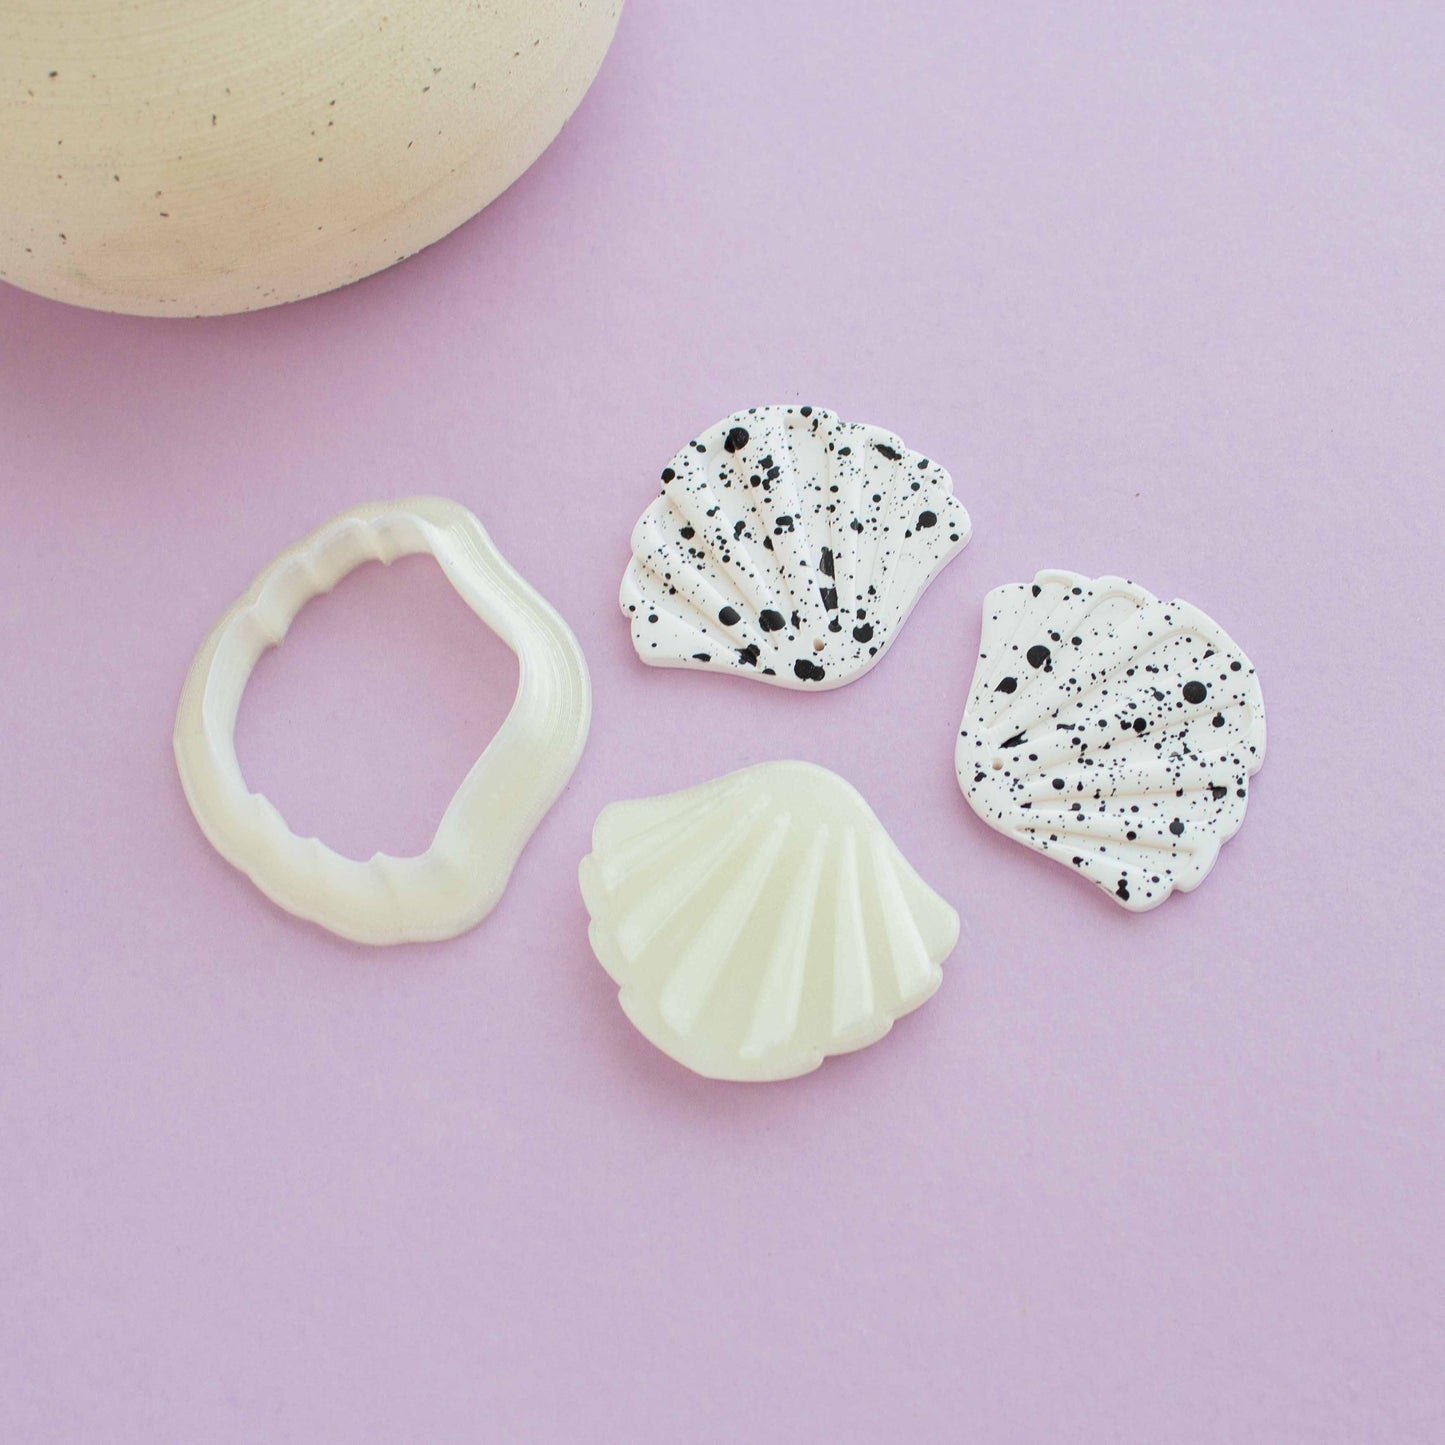 Shell shaped drop polymer clay earrings and polymer clay cutters